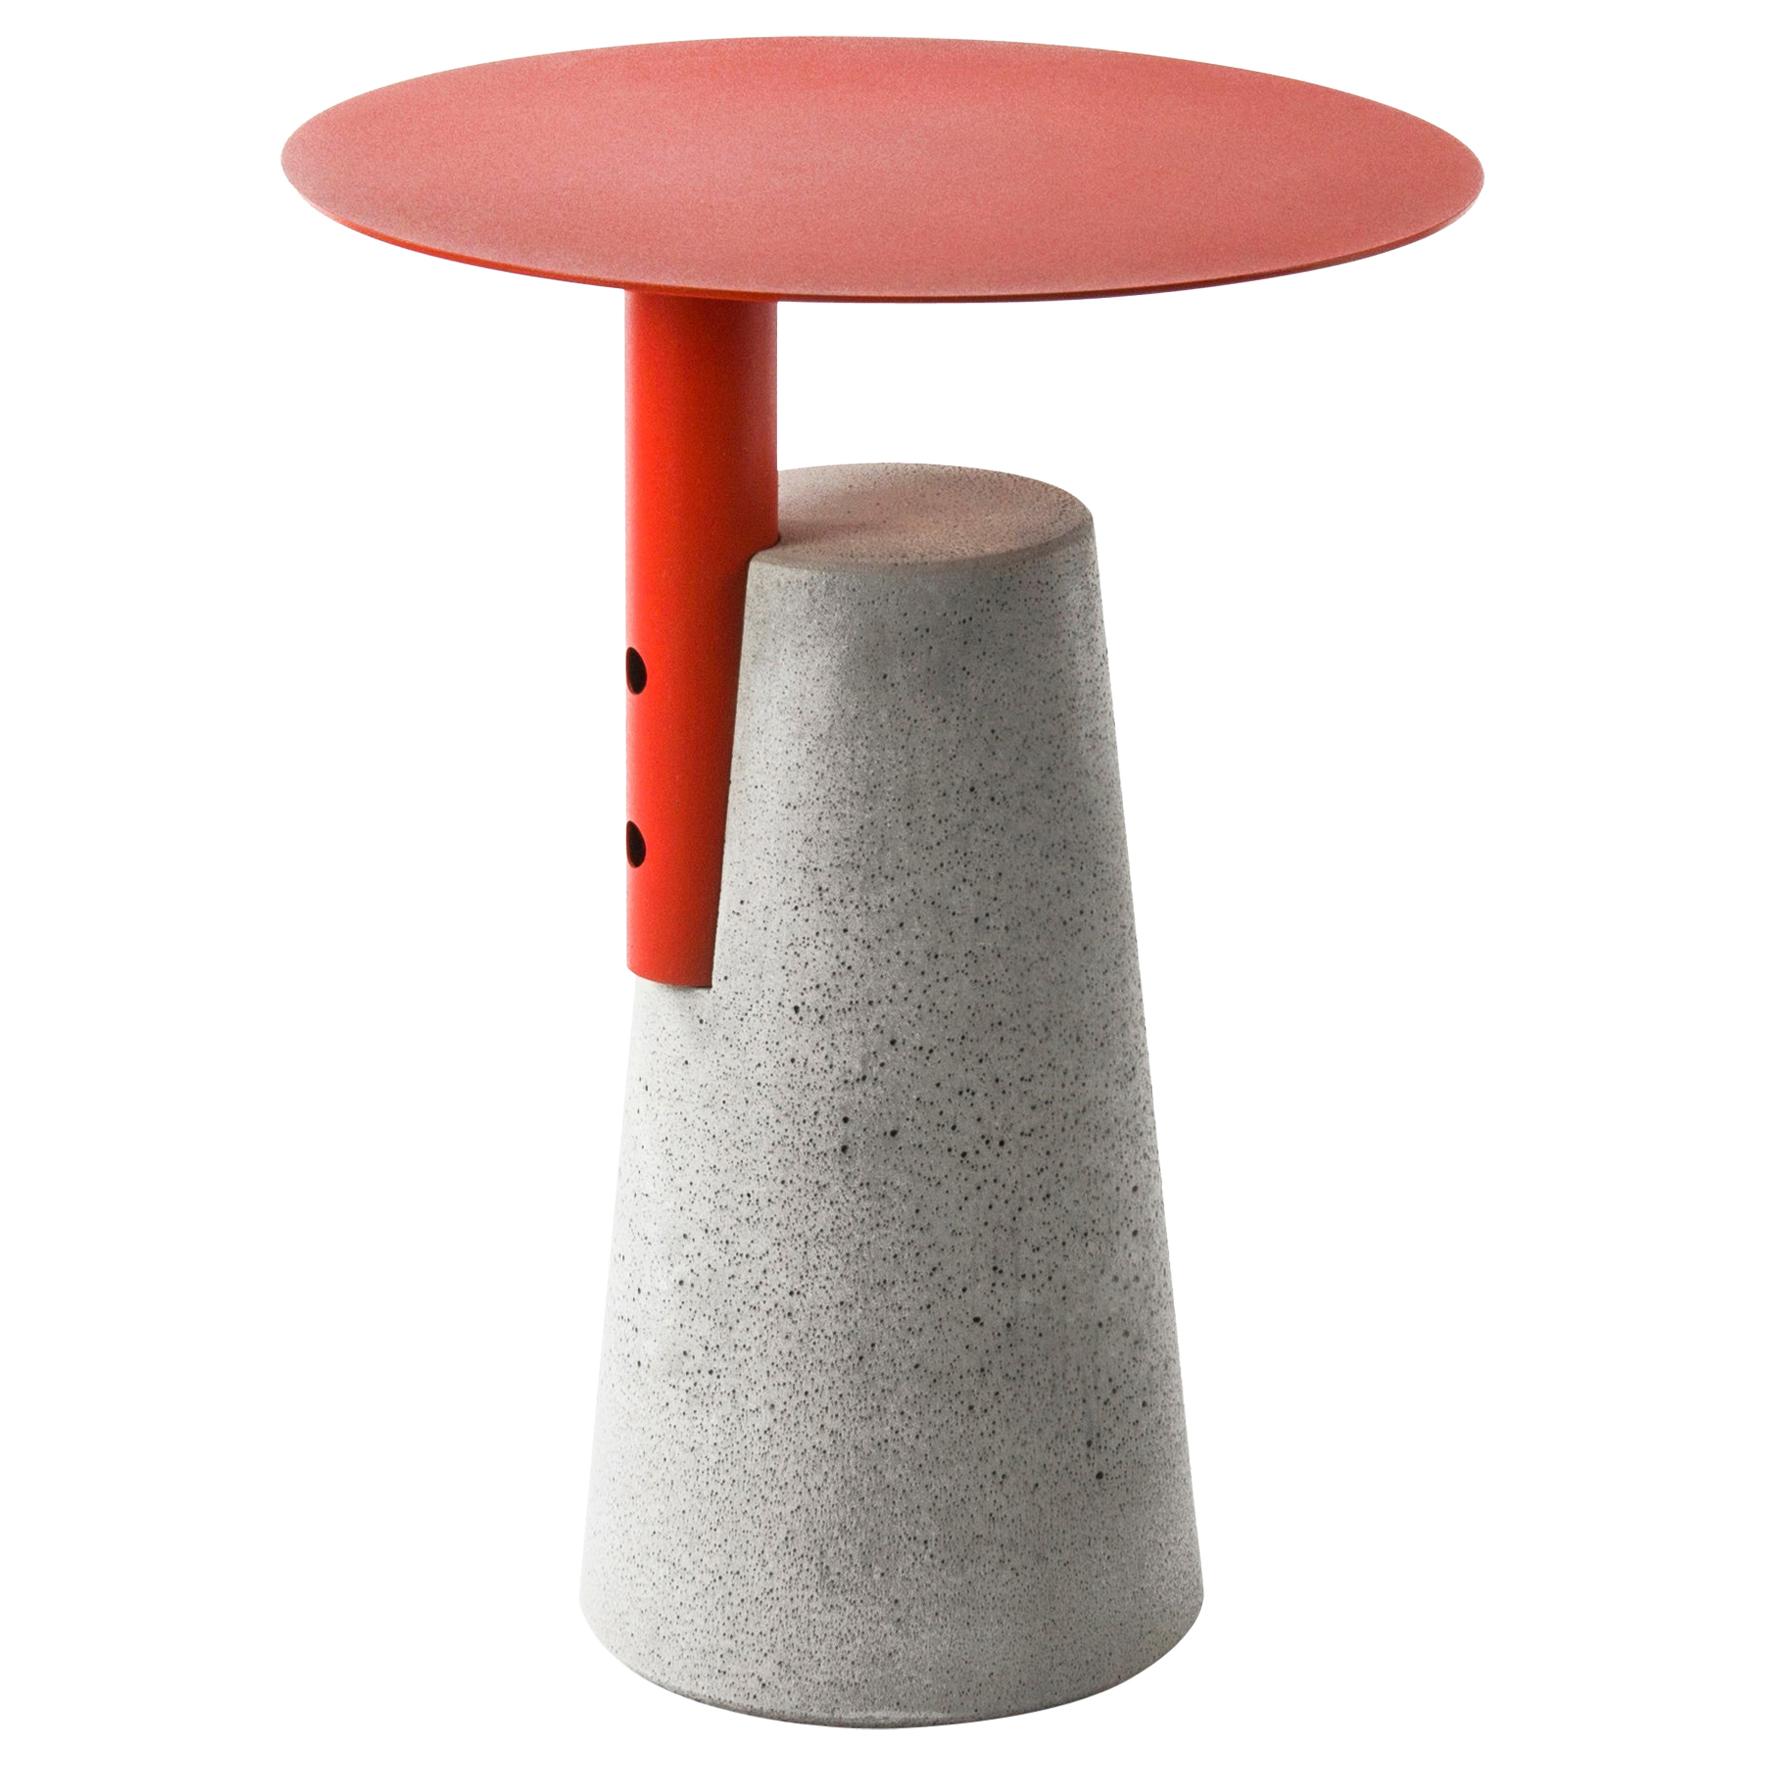 Concrete and Powder Coated Steel Side Table, “Bai, ” M, Red, from Concrete